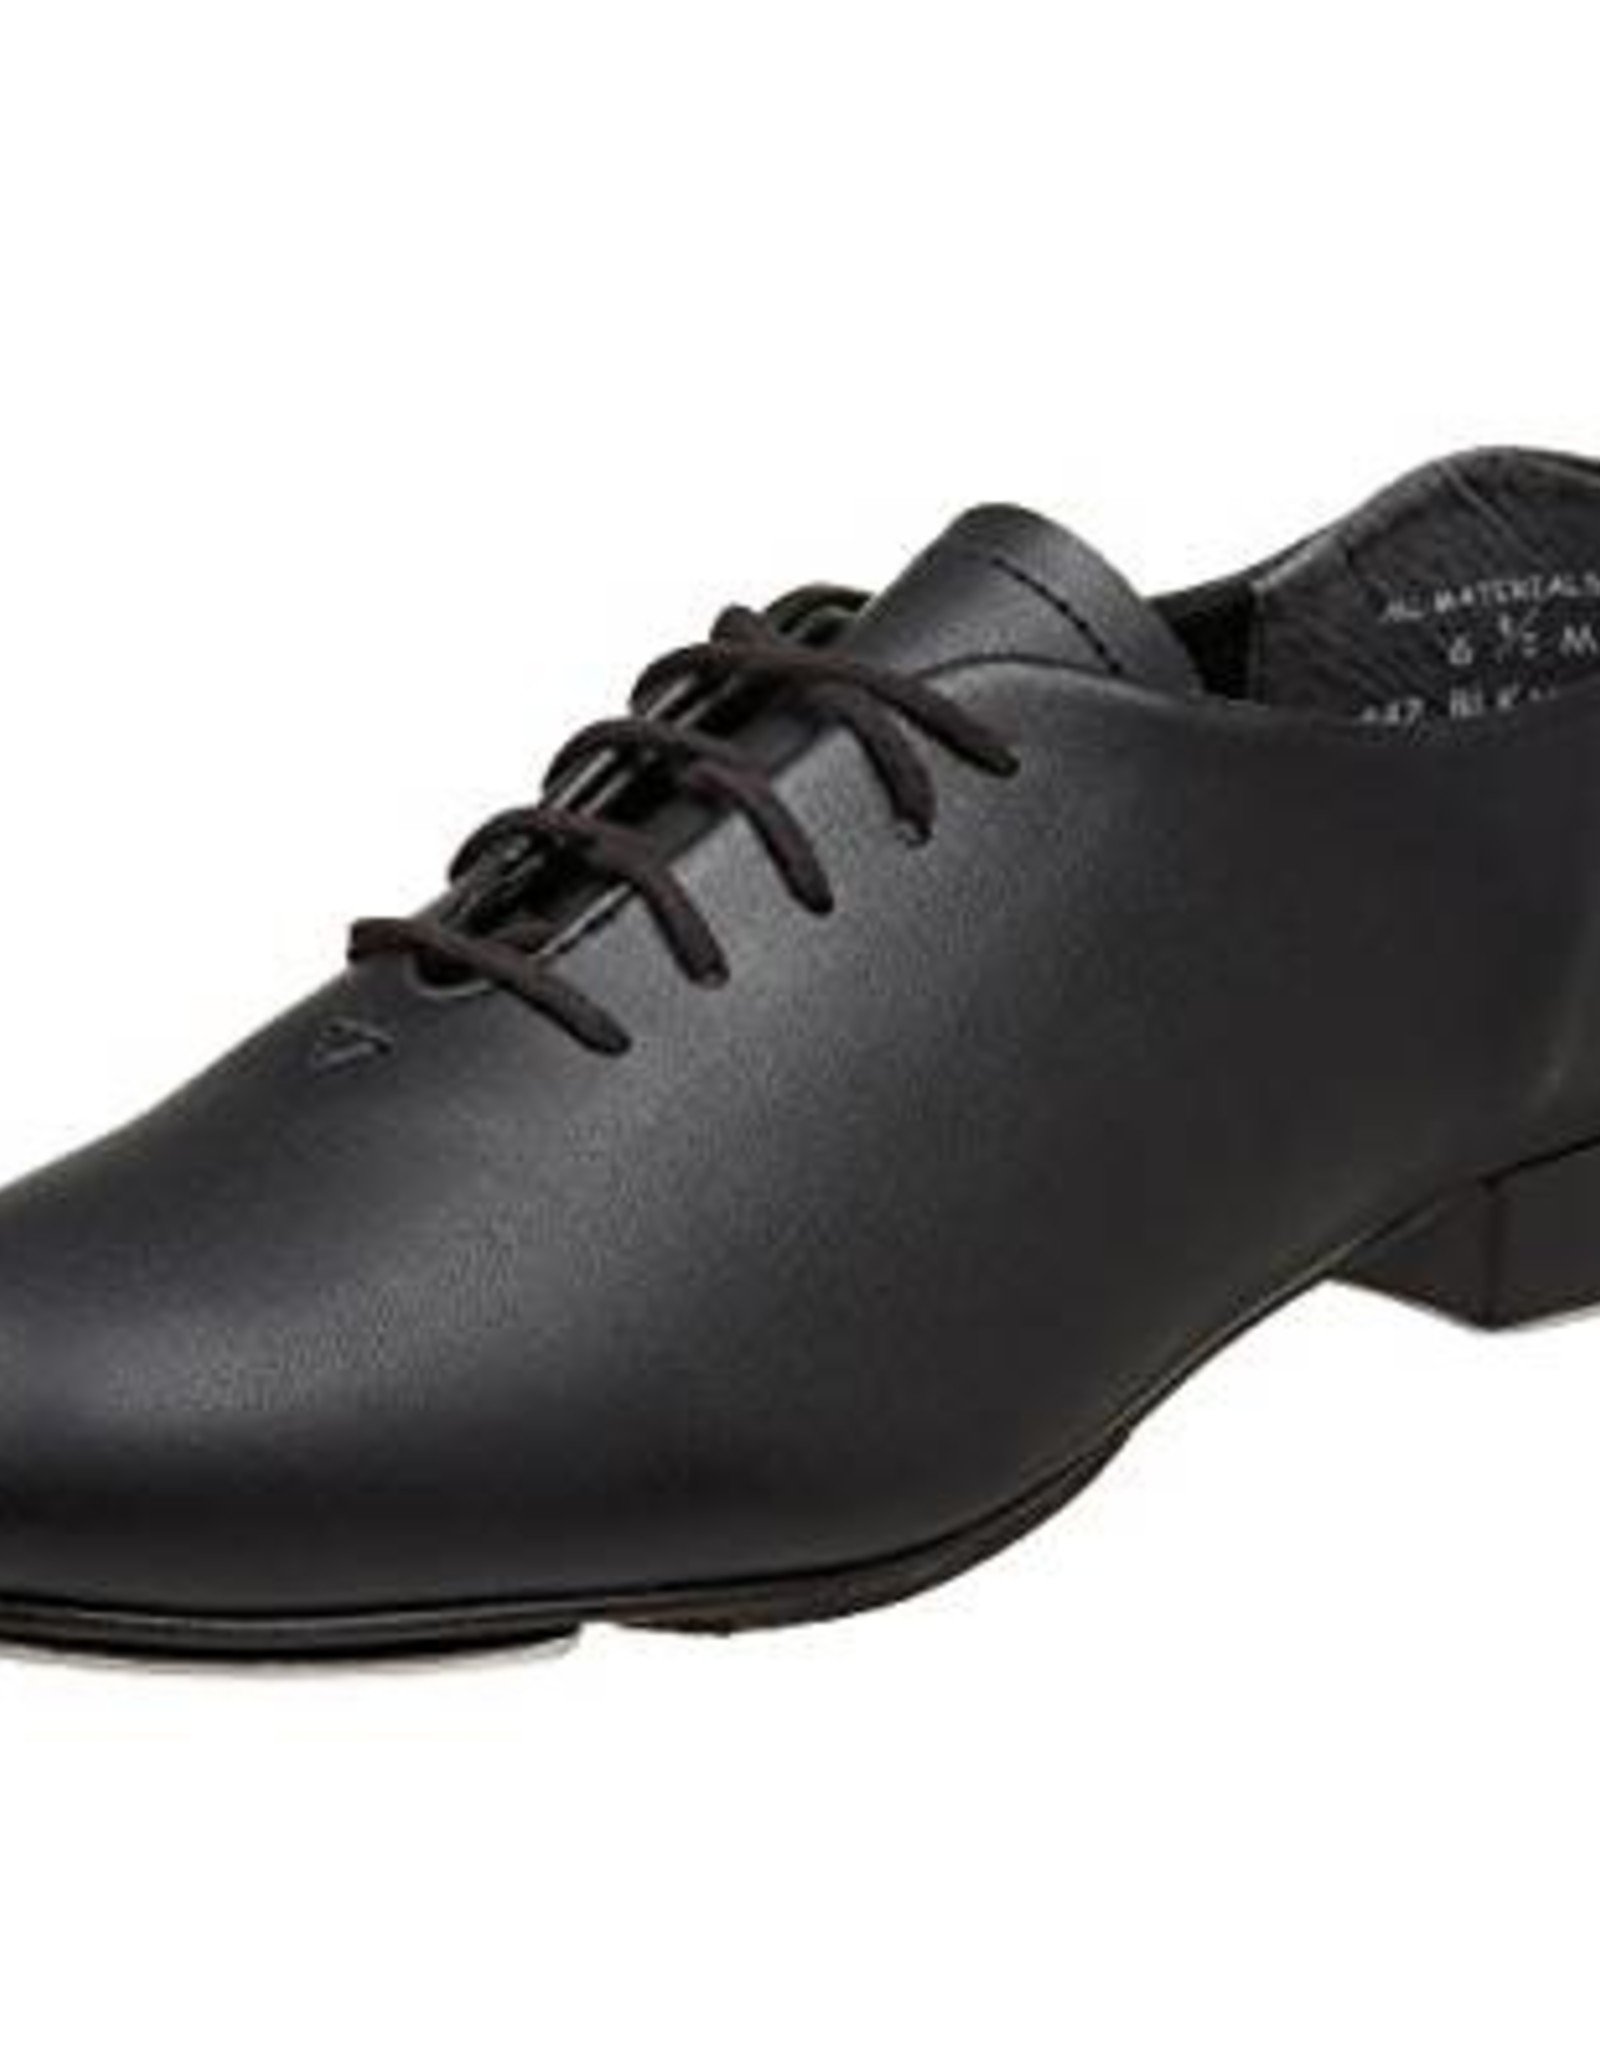 TAPSTER TAP SHOES (442) - DANZ